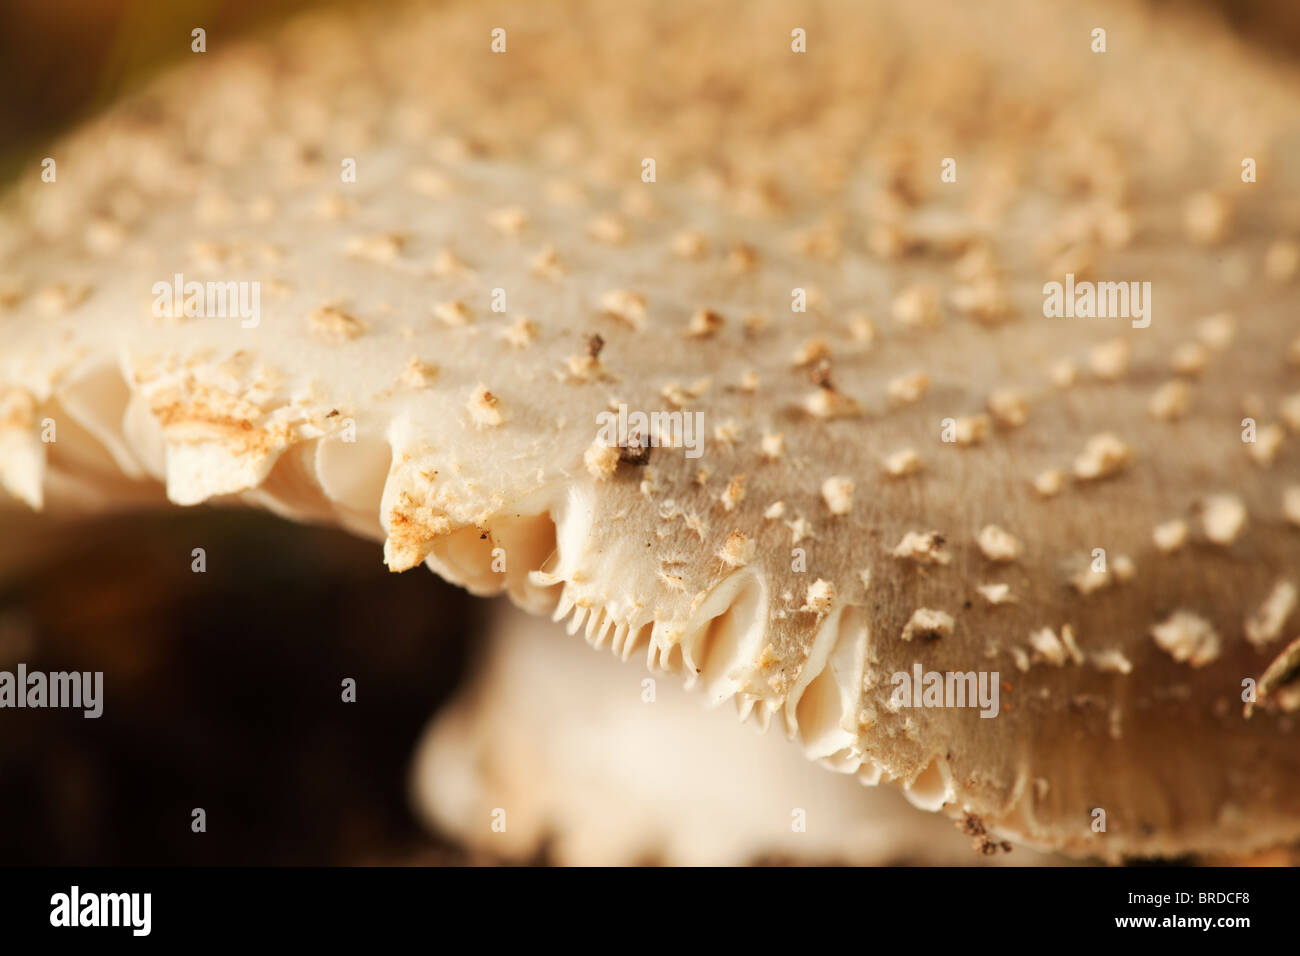 Closeup view of a blusher fungus, showing the scales, brownish colouration and splits in the side, revealing some of the gills. Stock Photo